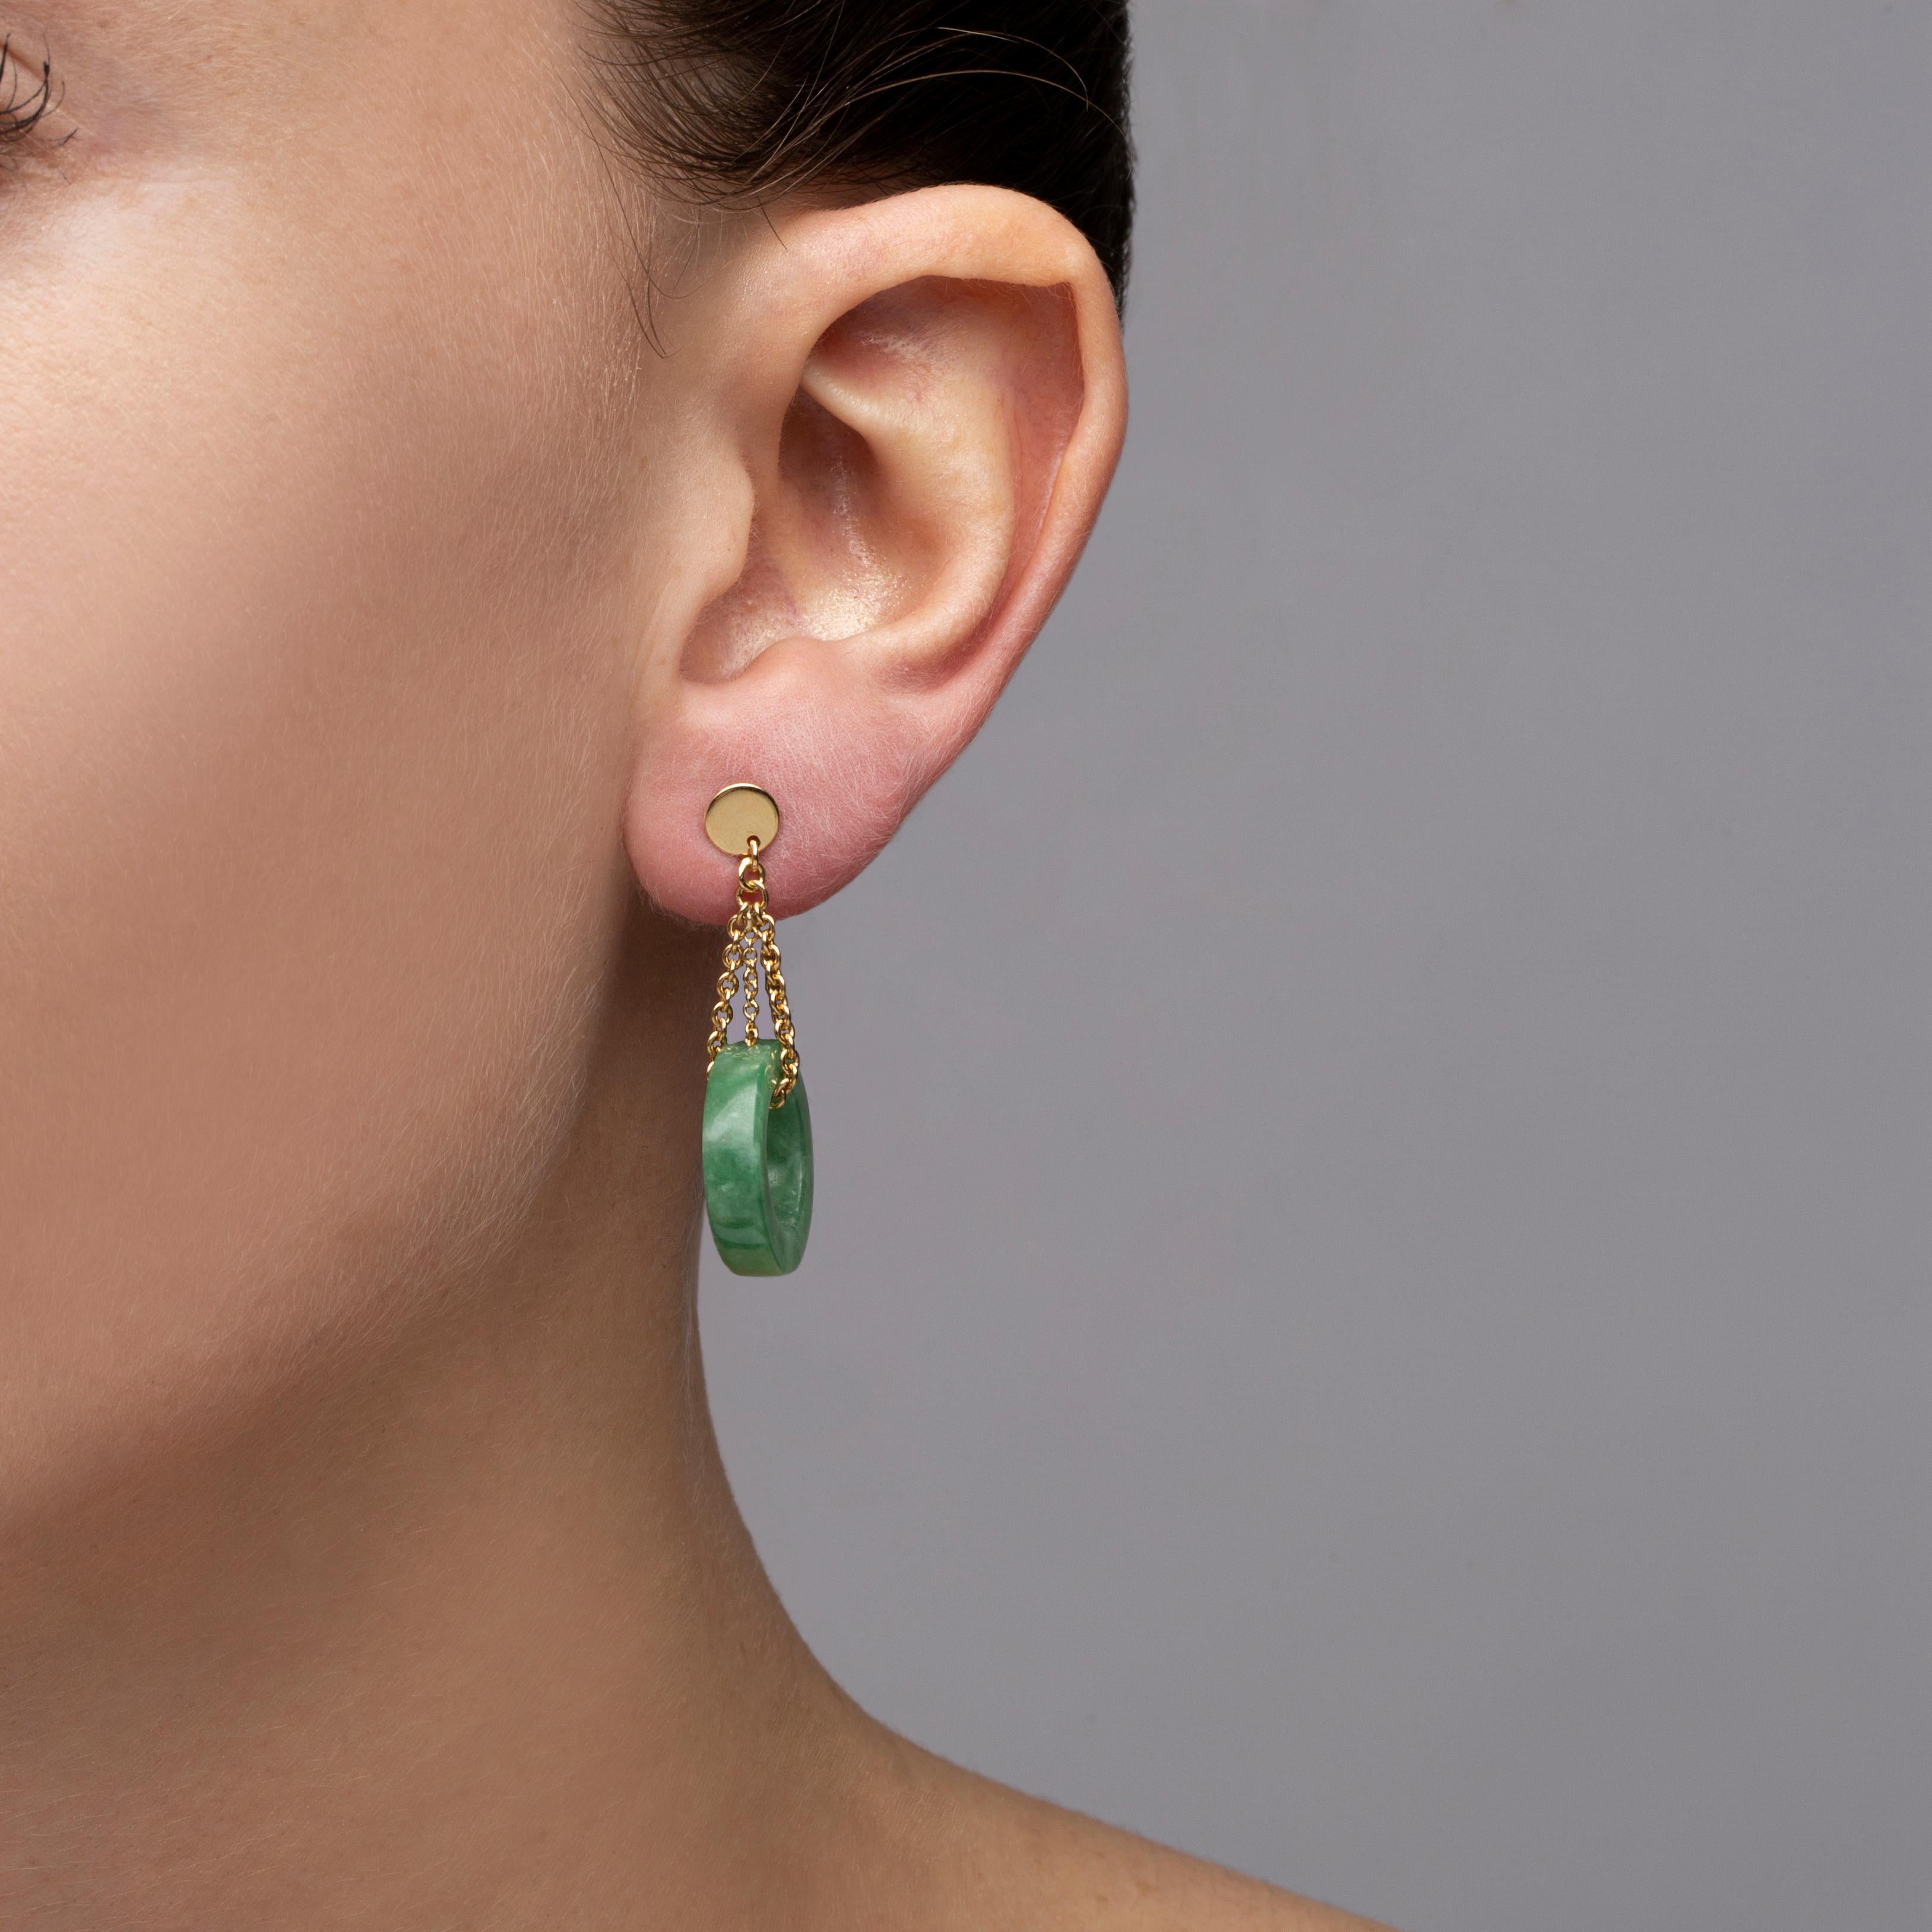 Alex Jona design collection, hand crafted in Italy, 18 karat yellow gold carved Burmese jadeite jade pendant earrings, weighing 10.96 carats.  
Dimensions : H 1.5in/39mm, W 0.74in/18.9mm, D 0.18in/4.77mm.

Alex Jona jewels stand out, not only for